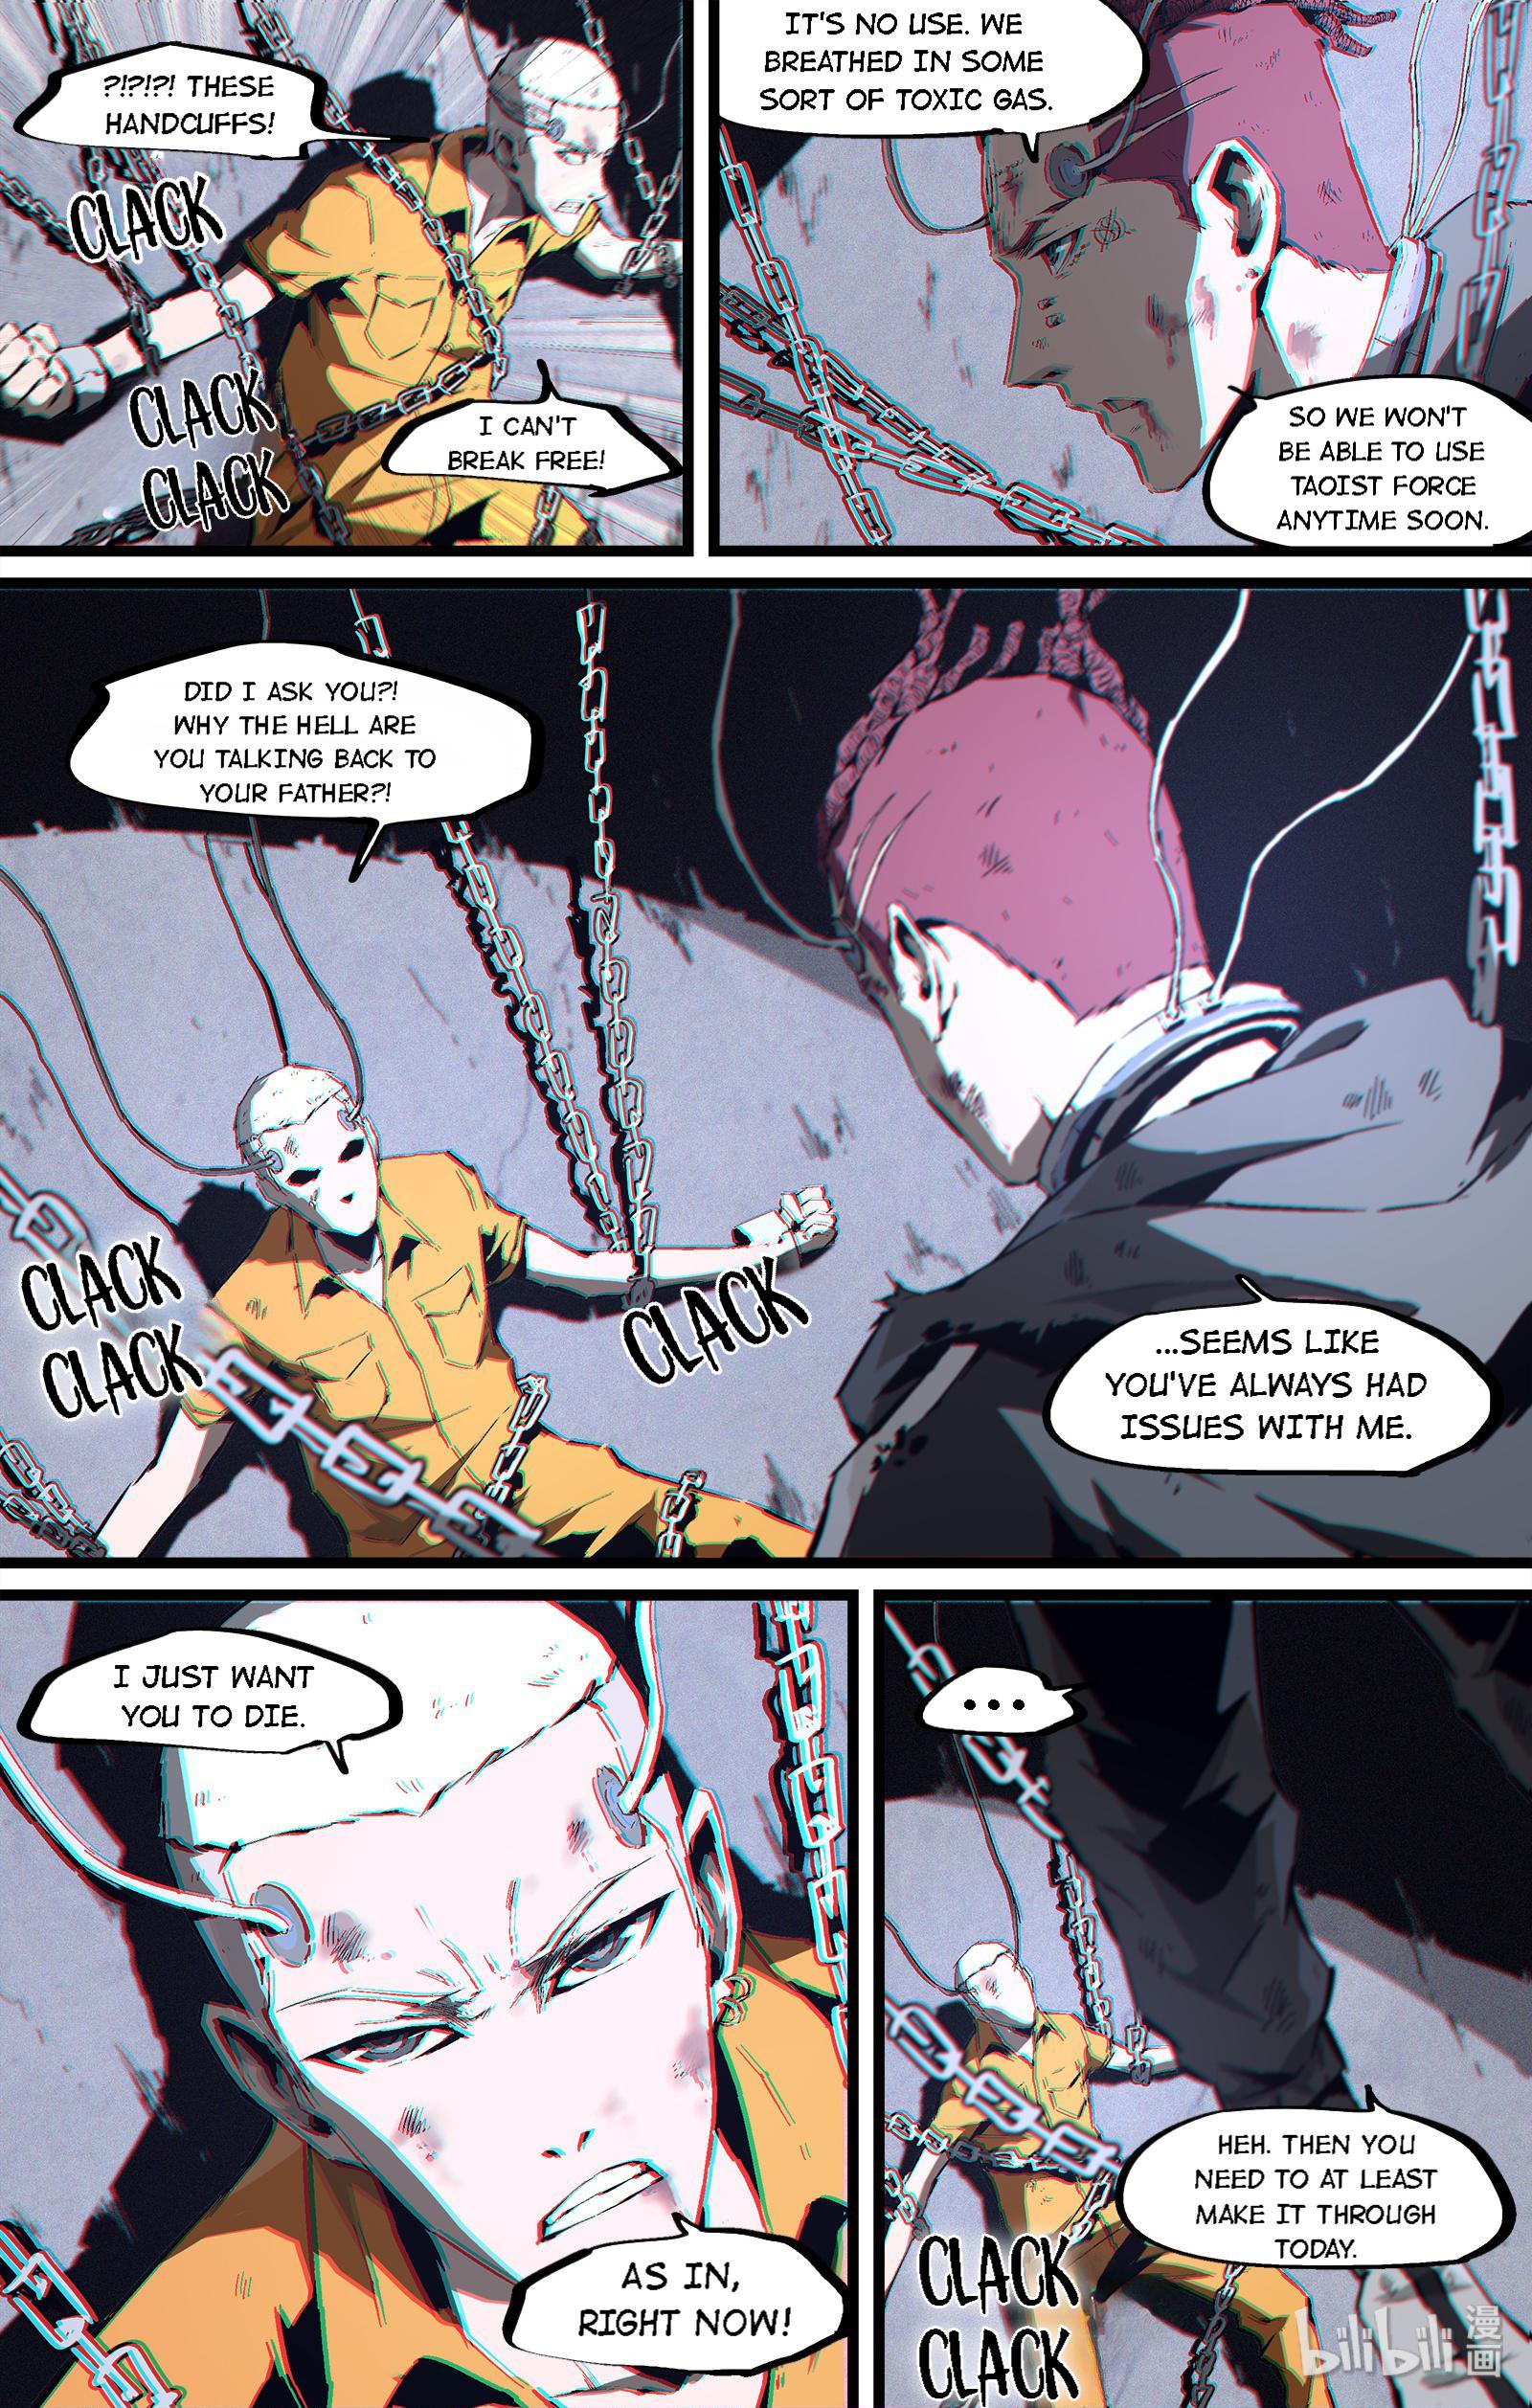 Lawless Zone - 128 page 3-74335889